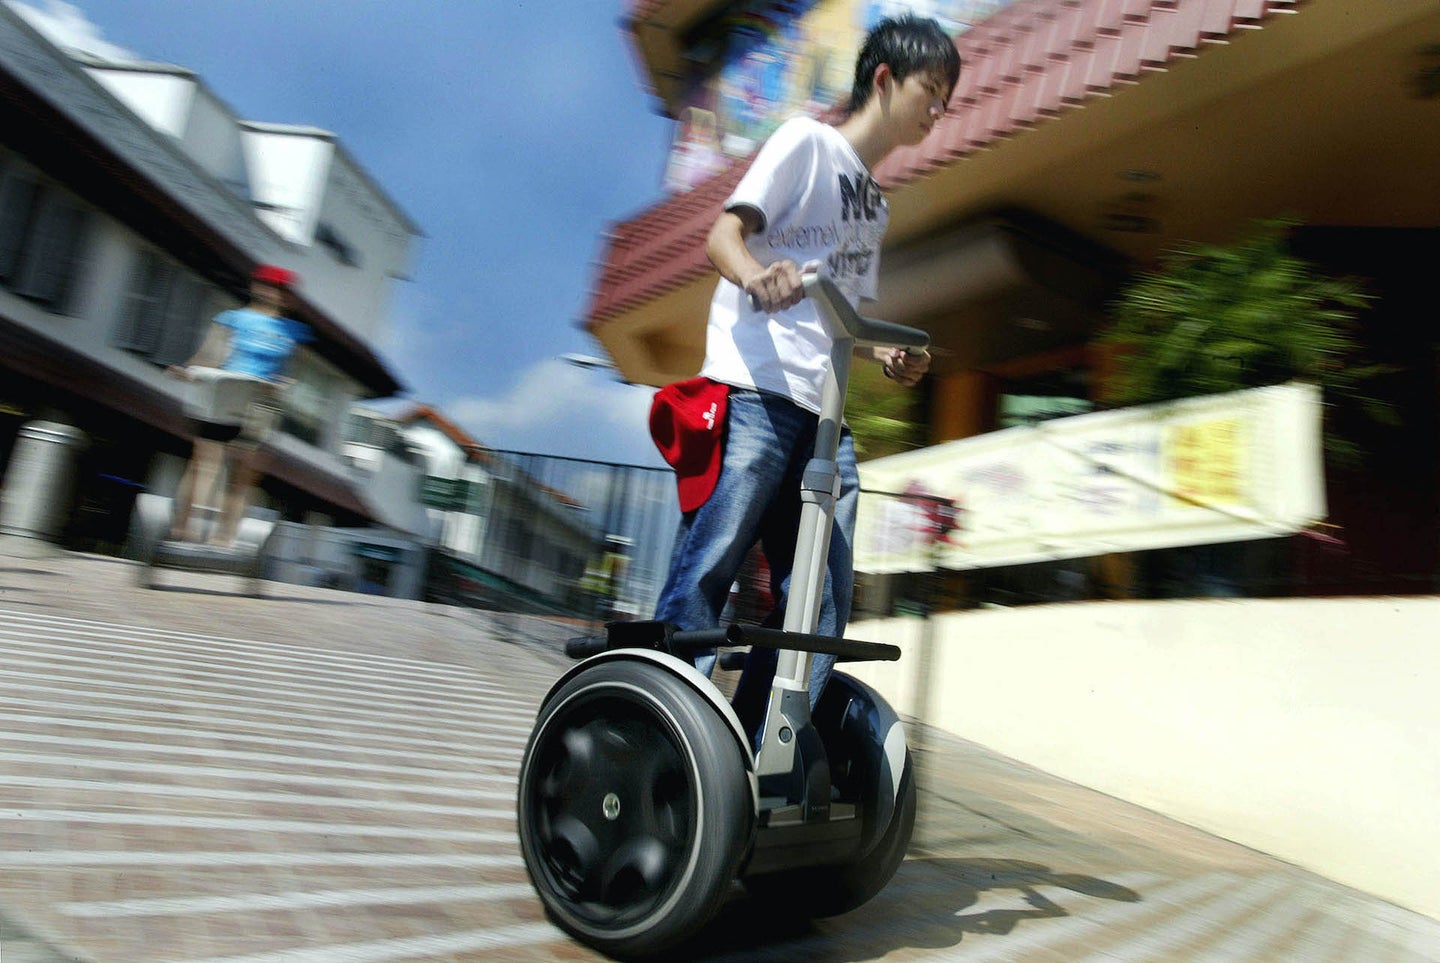 The Segway Is Dead After 20 Years in Production, But It Was Still Ahead of Its Time